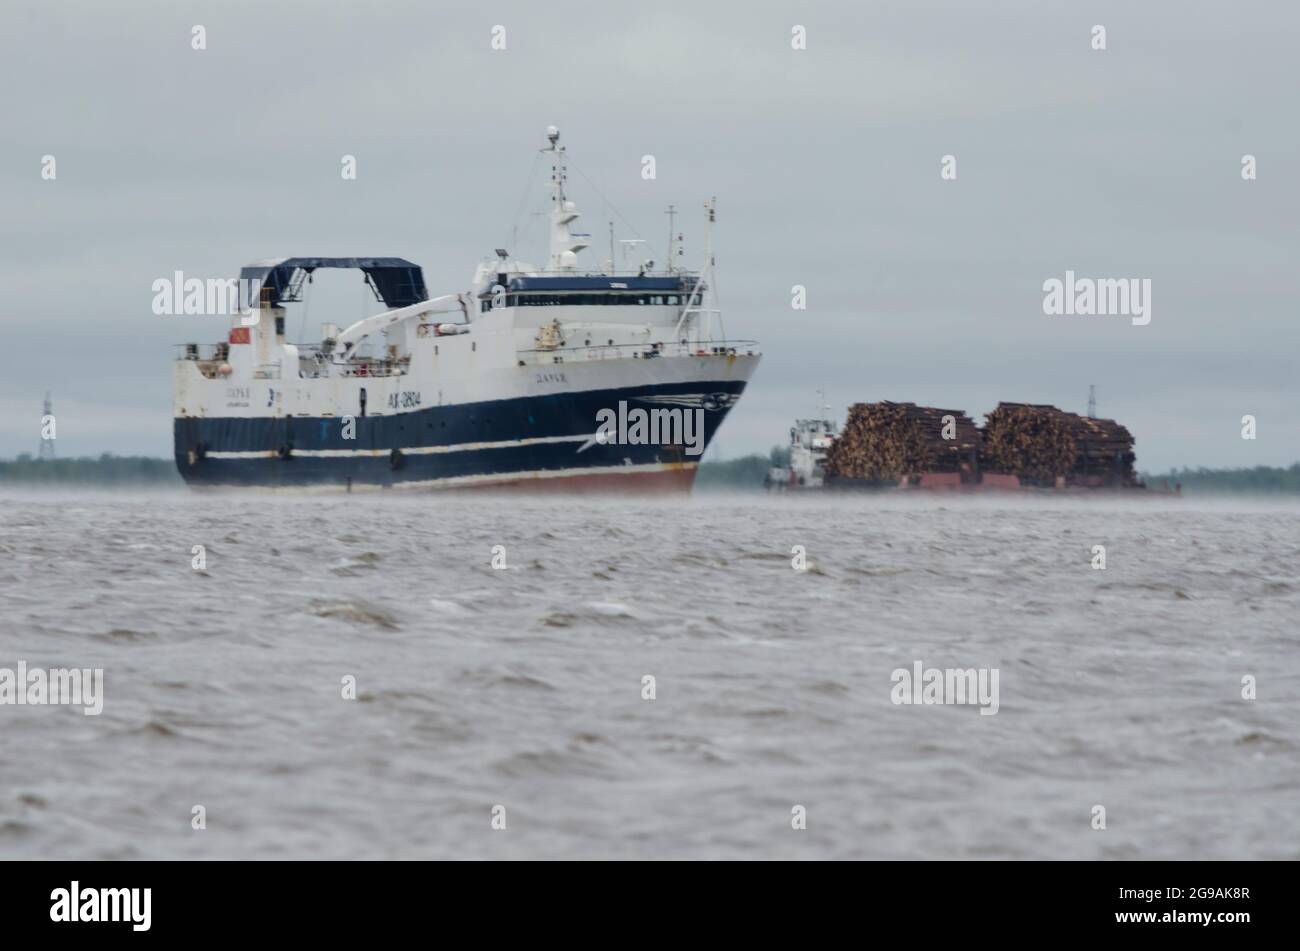 May 2021 - Arkhangelsk. Fishing boat 'Daria' and a tug with a forest. River rafting. Russia, Arkhangelsk region Stock Photo